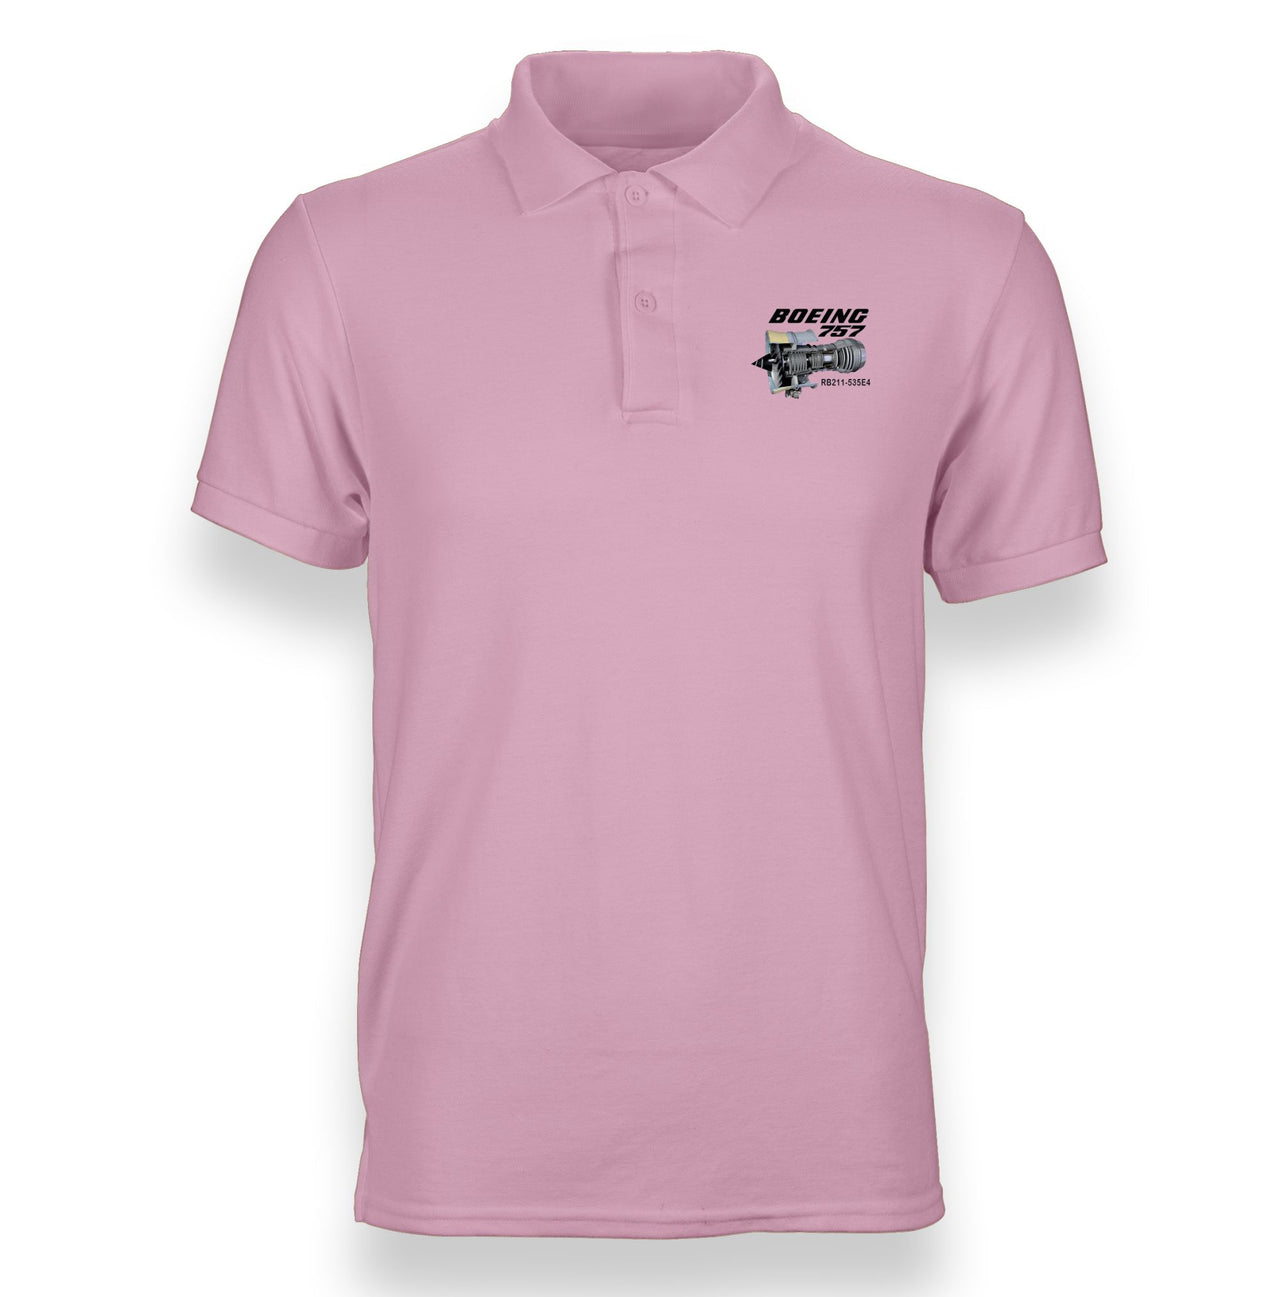 Boeing 757 & Rolls Royce Engine (RB211) Designed "WOMEN" Polo T-Shirts